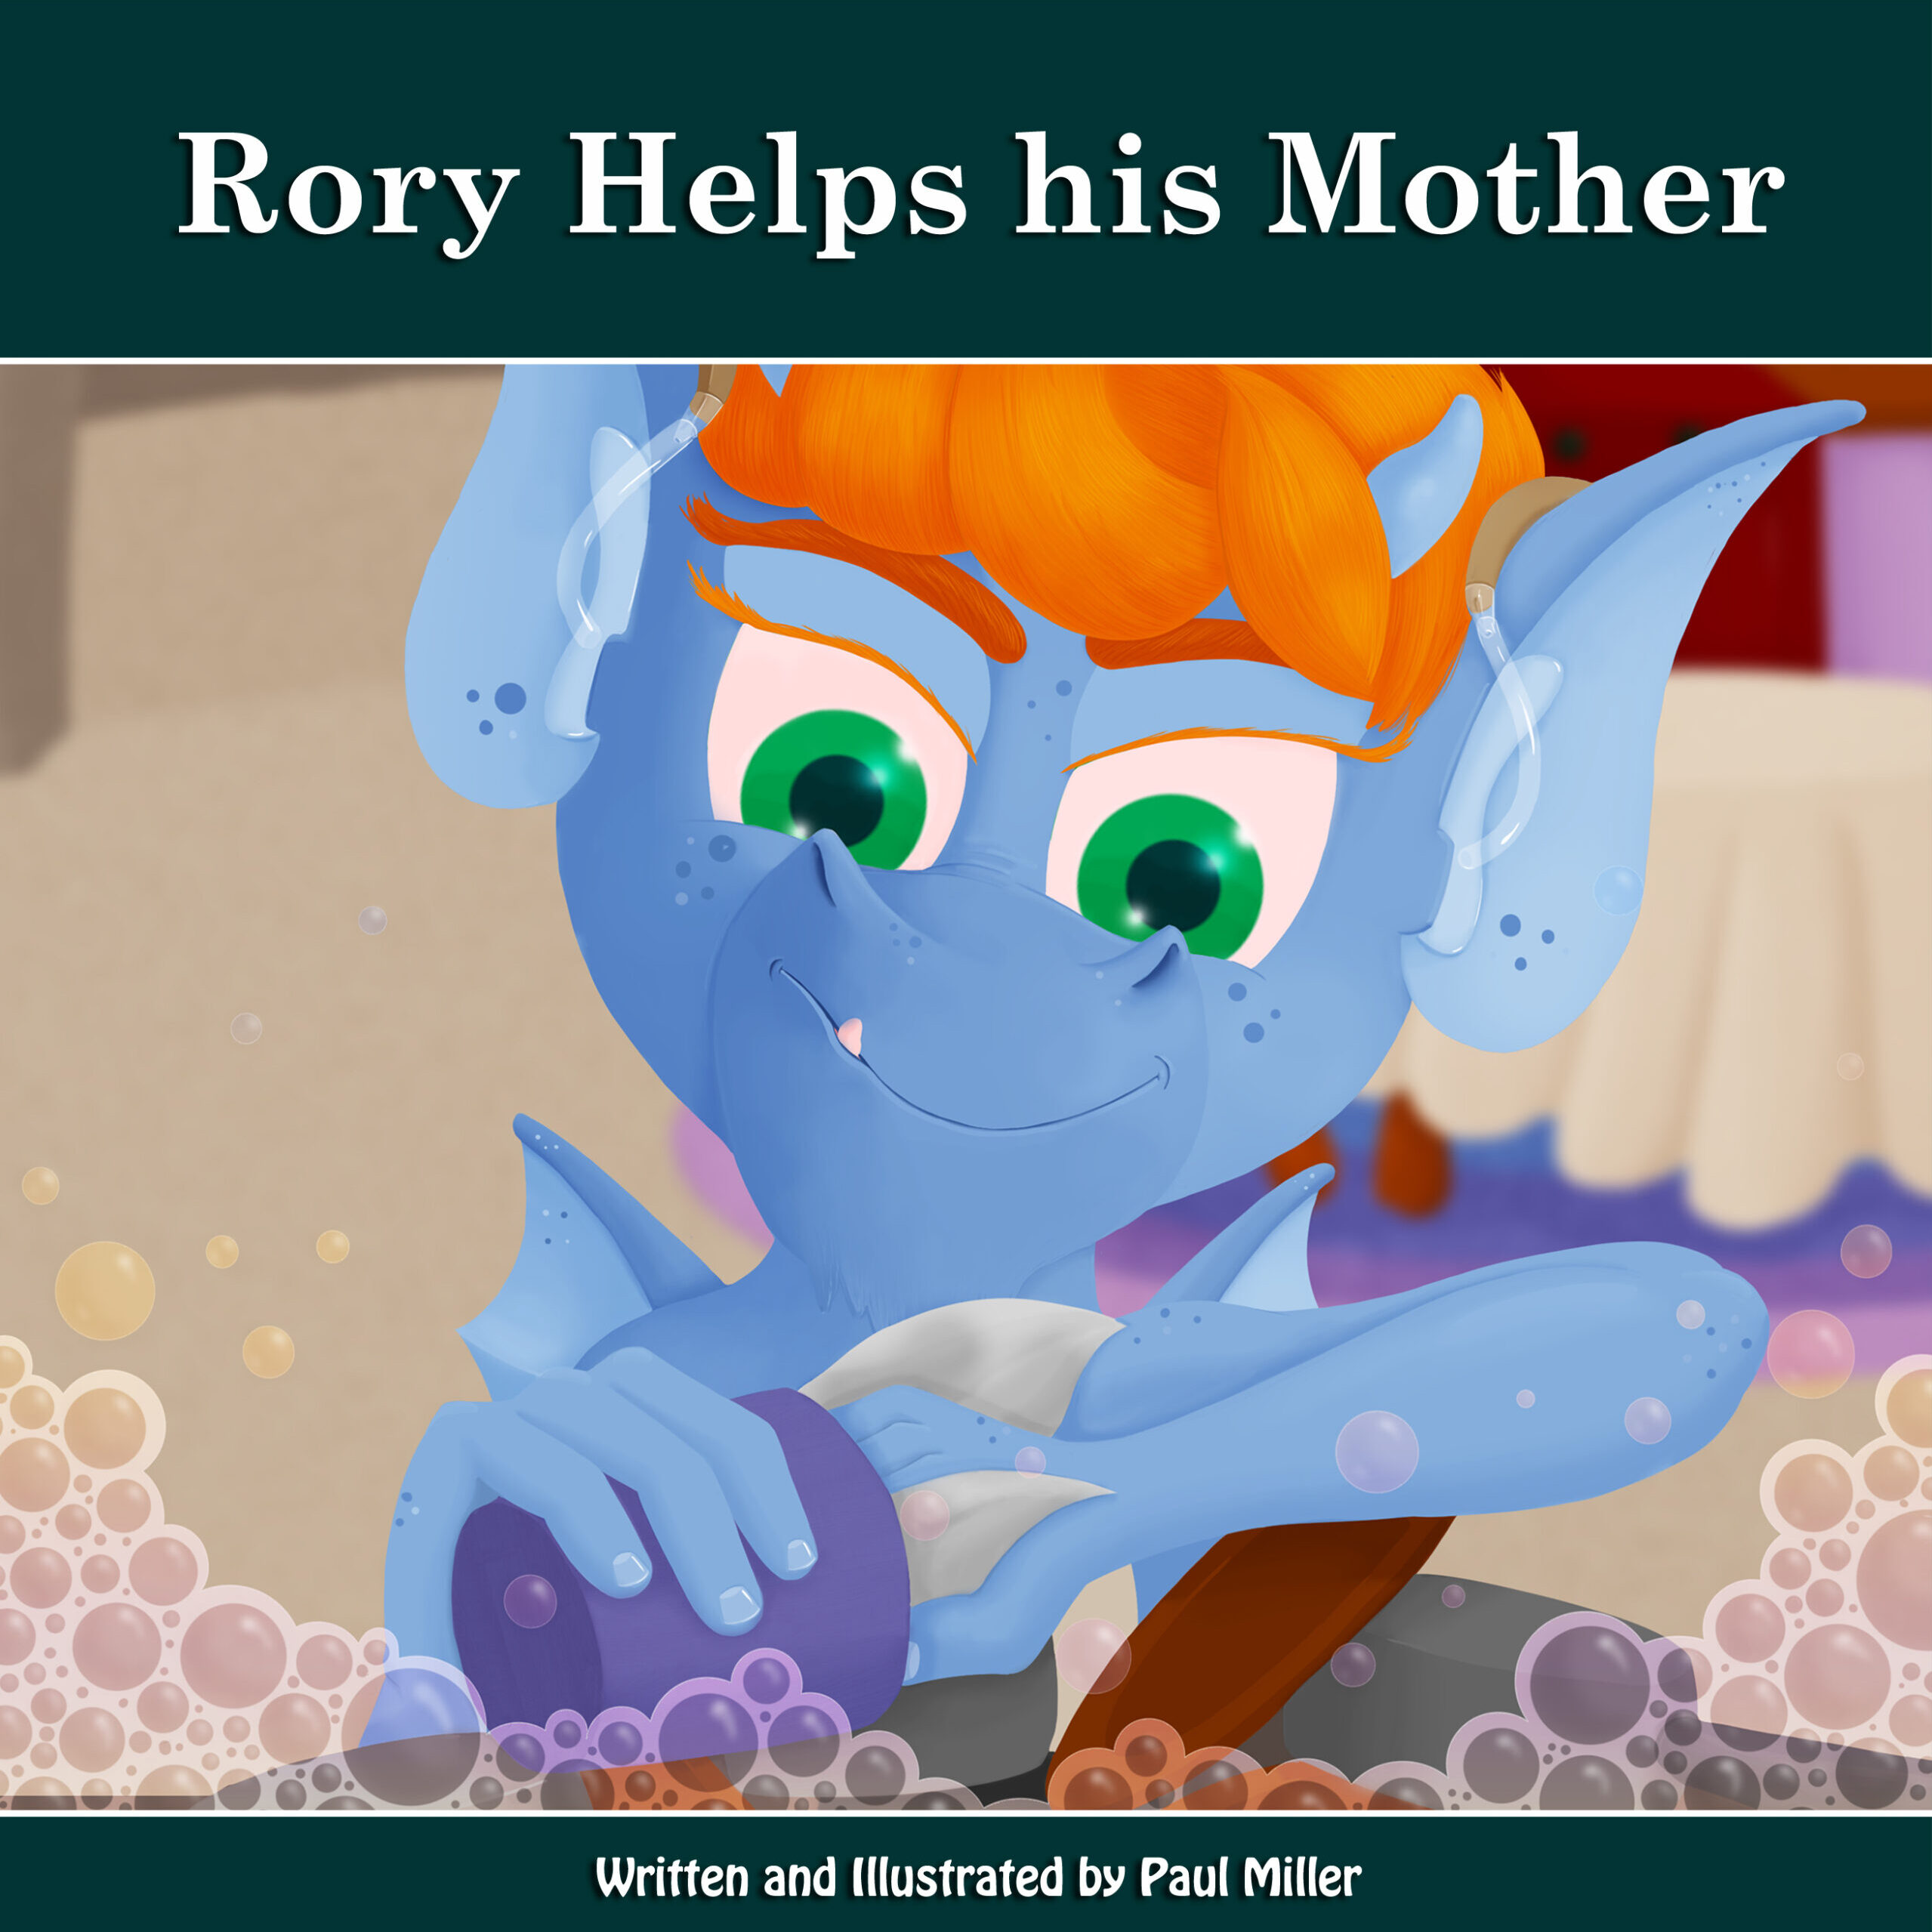 Rory helps his Mother Picture book